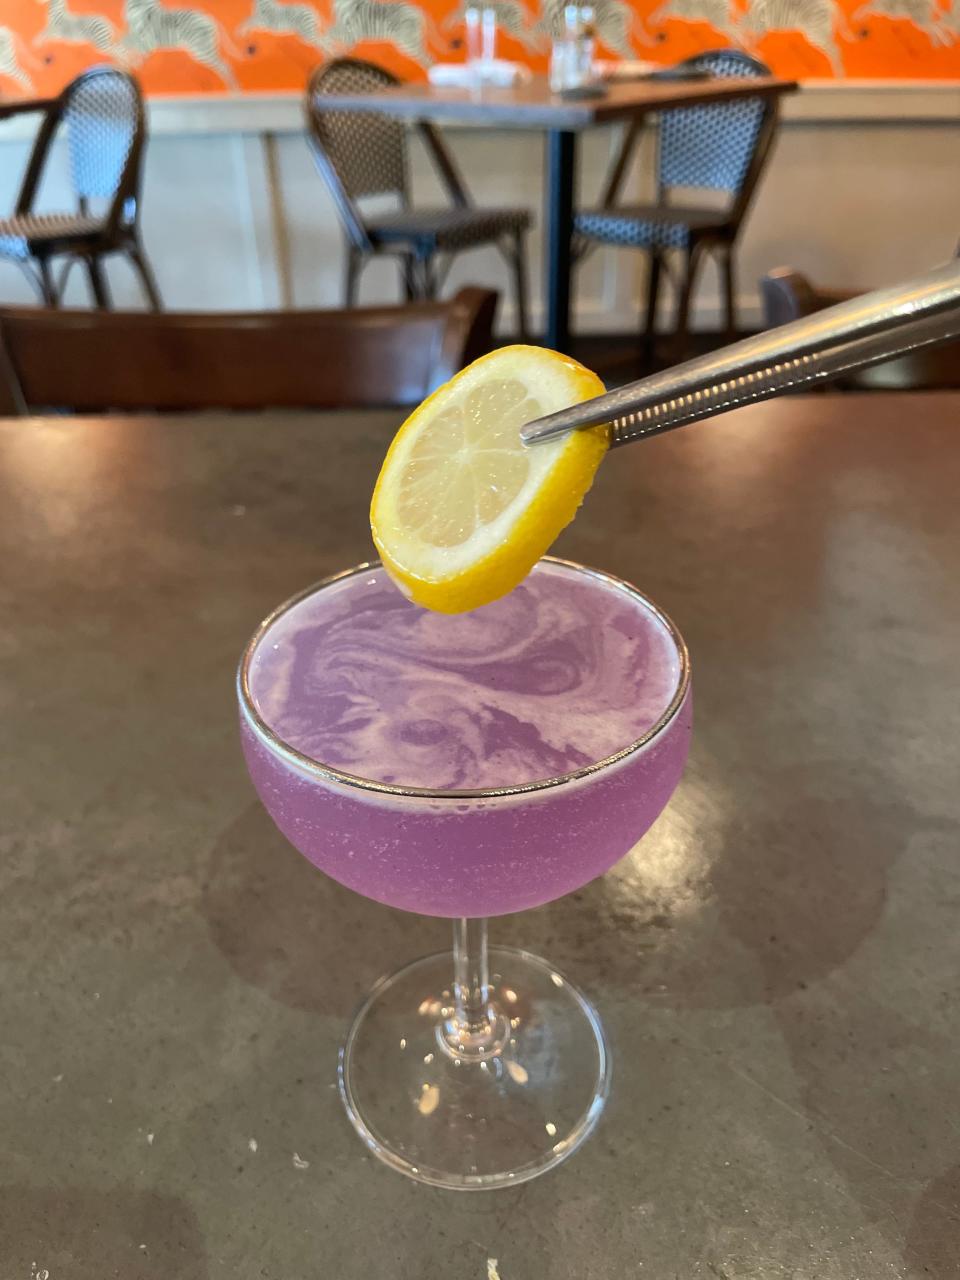 Moms can enjoy a 'Same But Different' cocktail, which features vodka, lemon juice, lavender simple syrup, Butterfly pea powder. prosecco and is garnished with a lemon wheel, on the house for Mother's Day at Almond in Palm Beach.